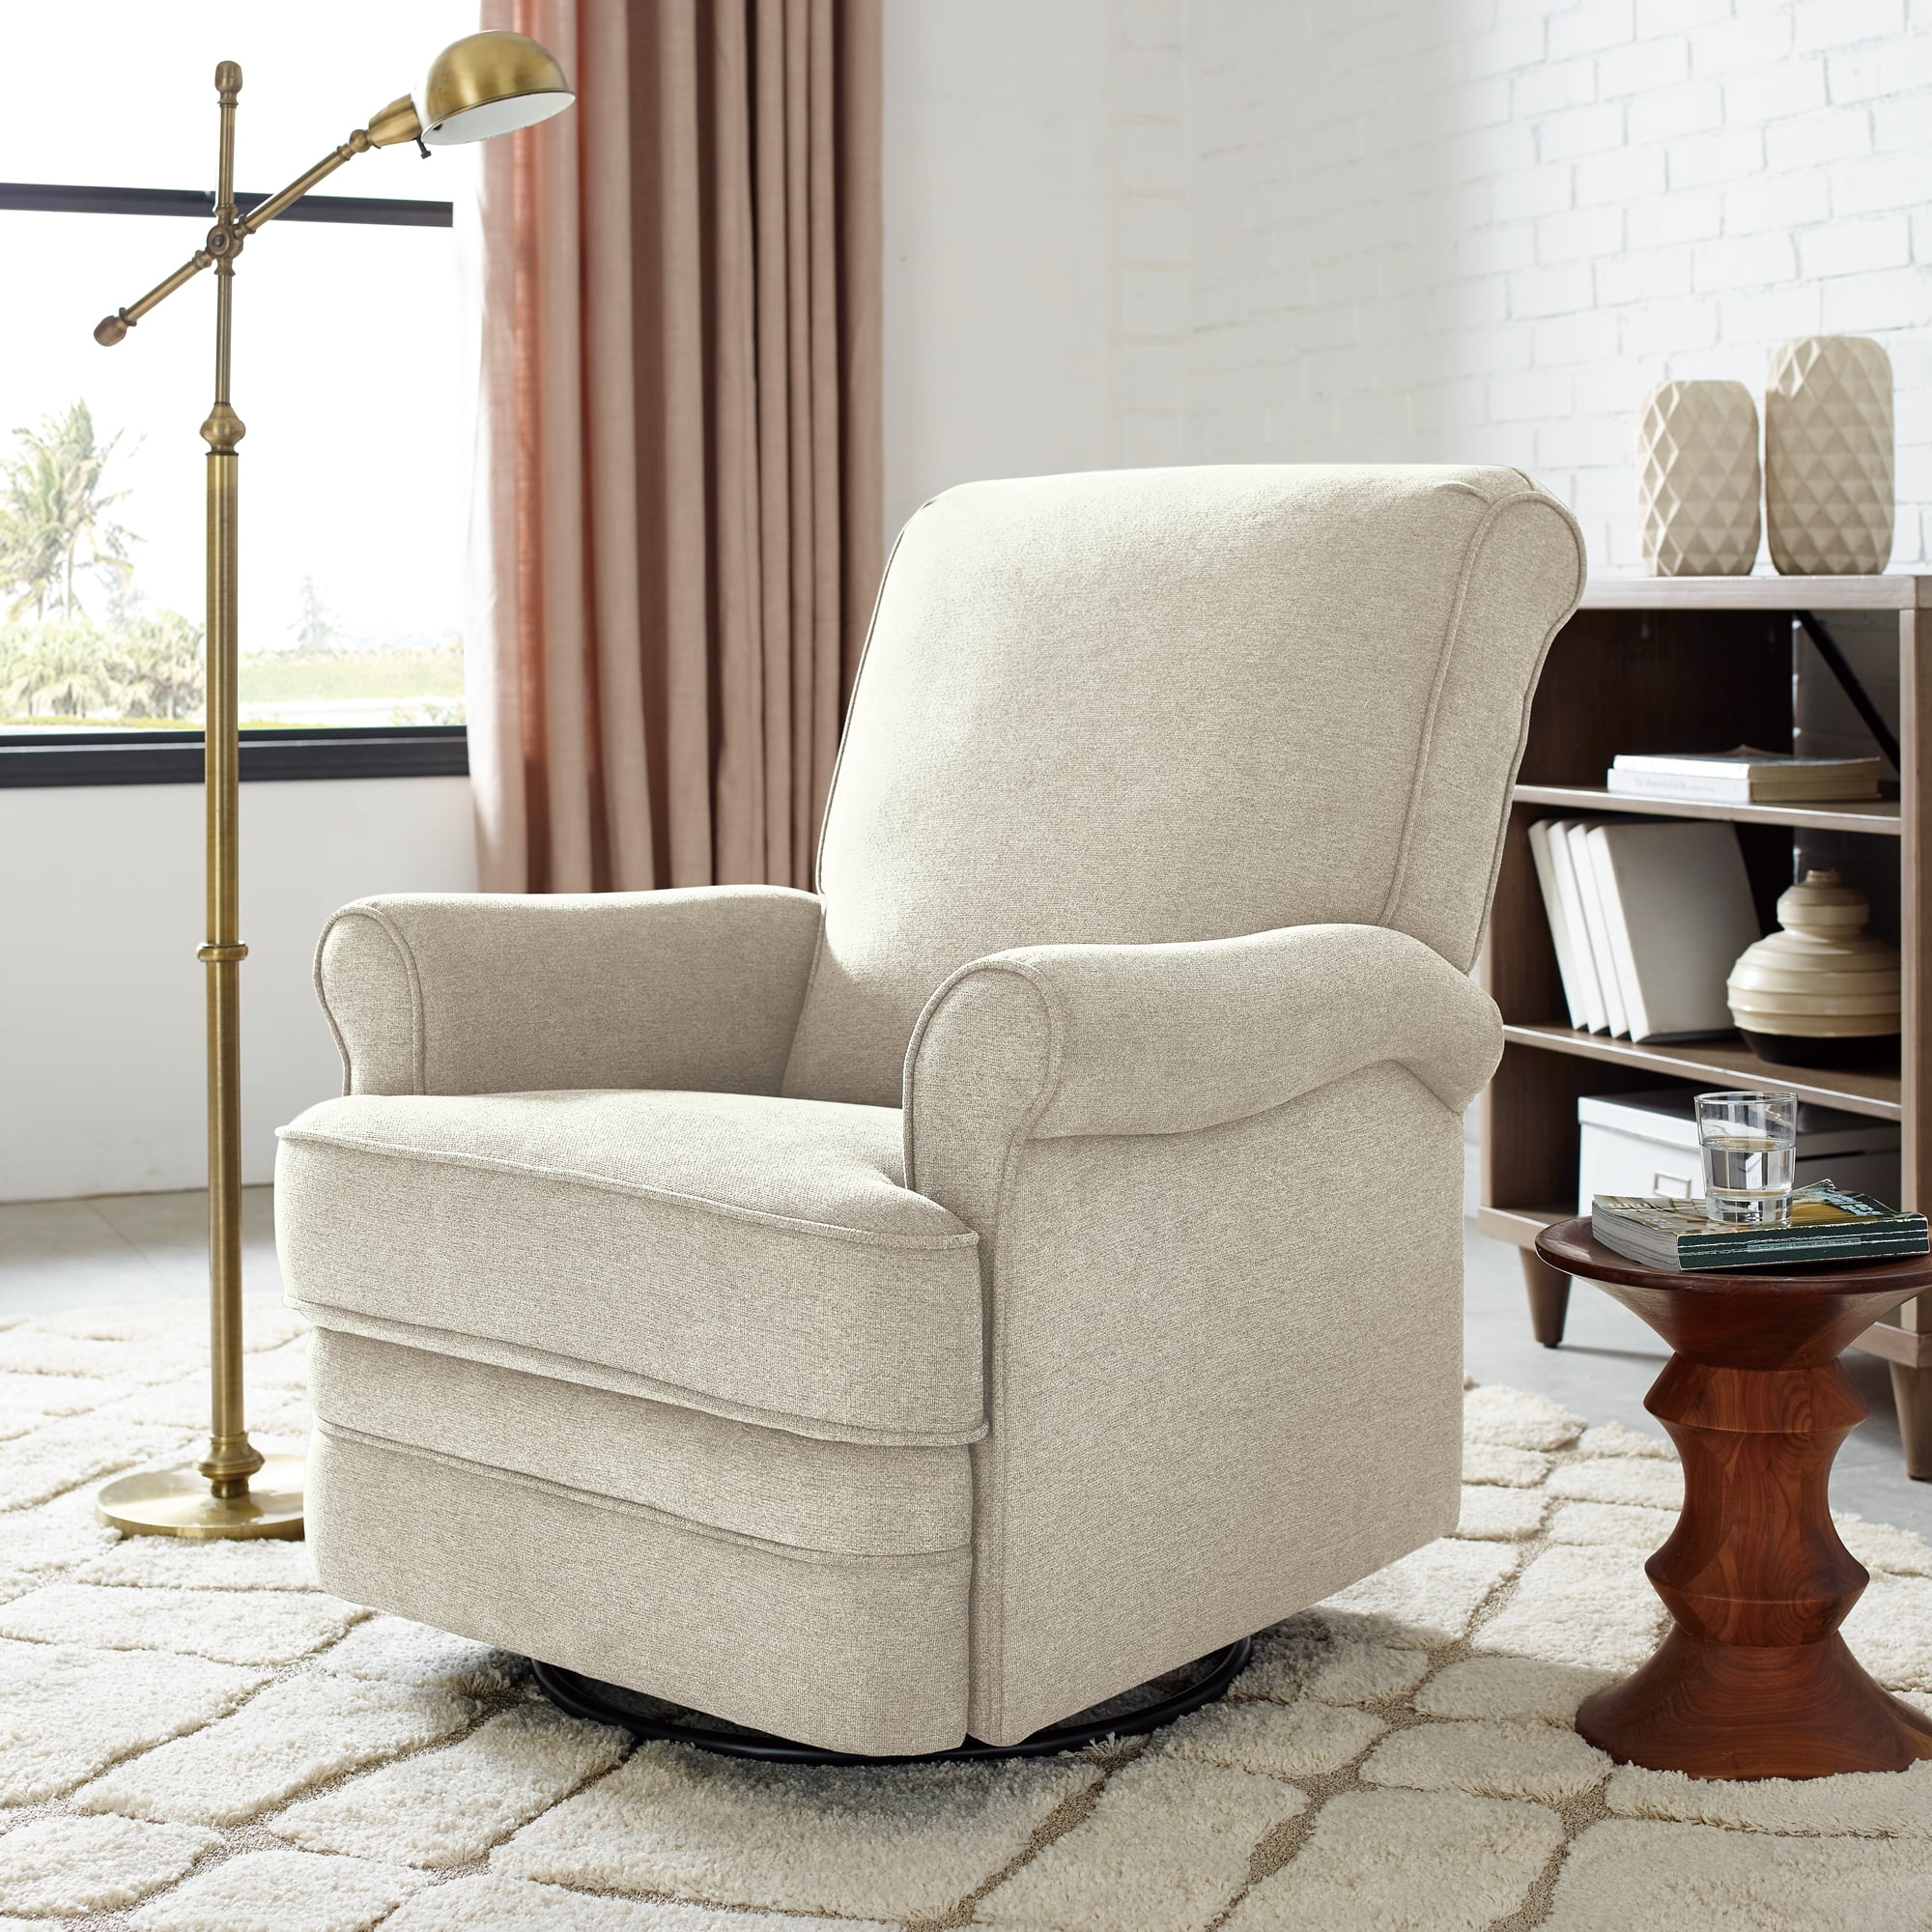 upholstered glider rocking chair